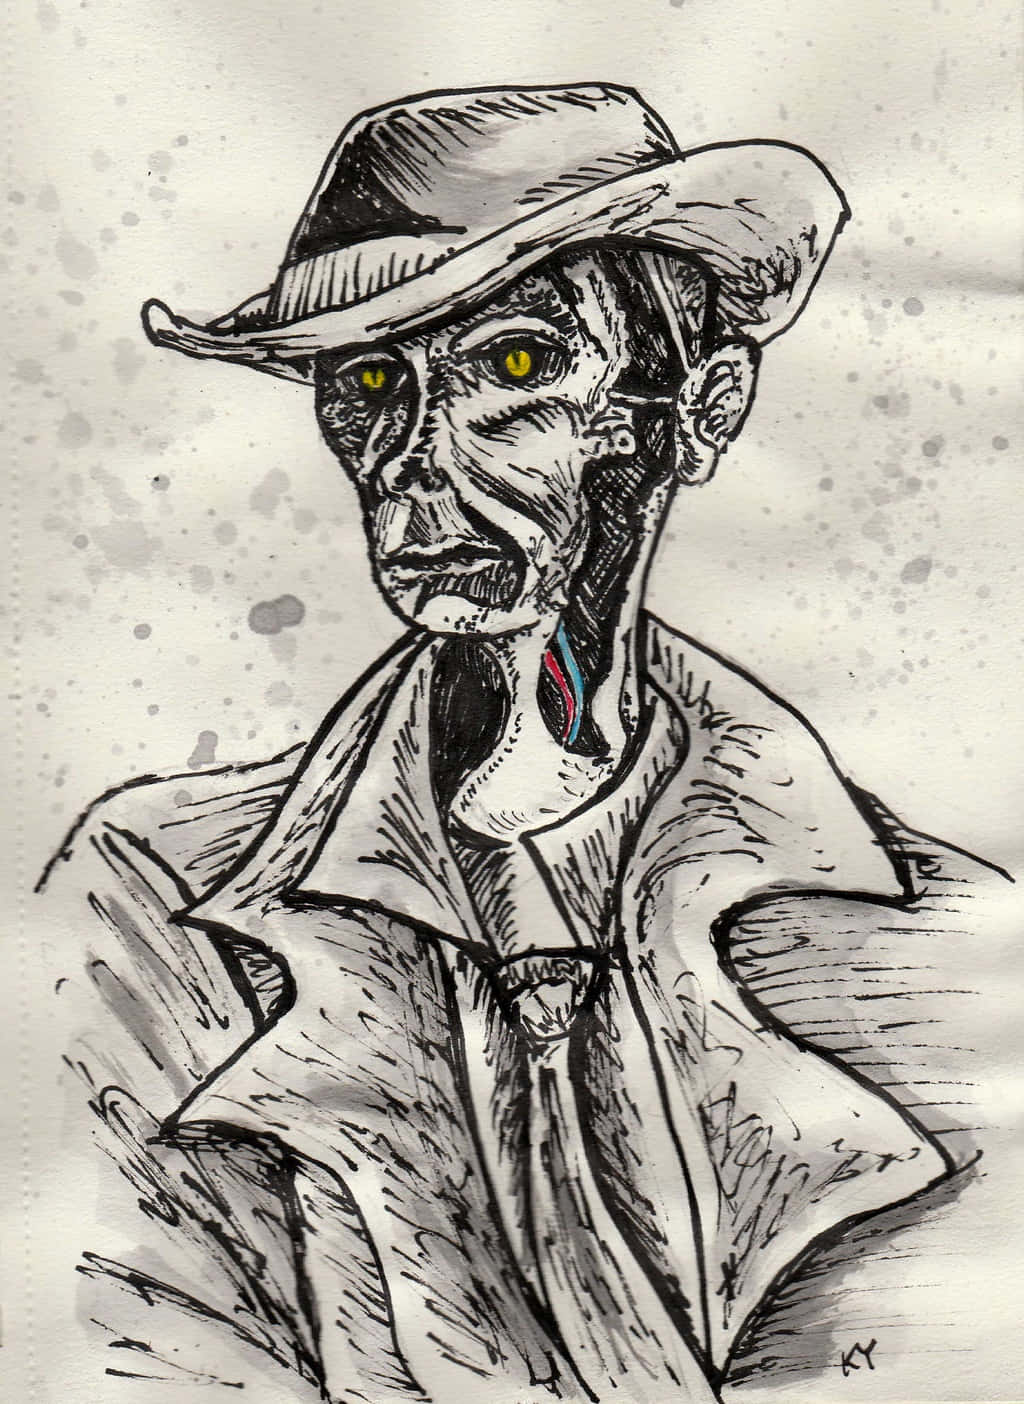 Nick Valentine: Synth Detective in Post-Apocalyptic World Wallpaper